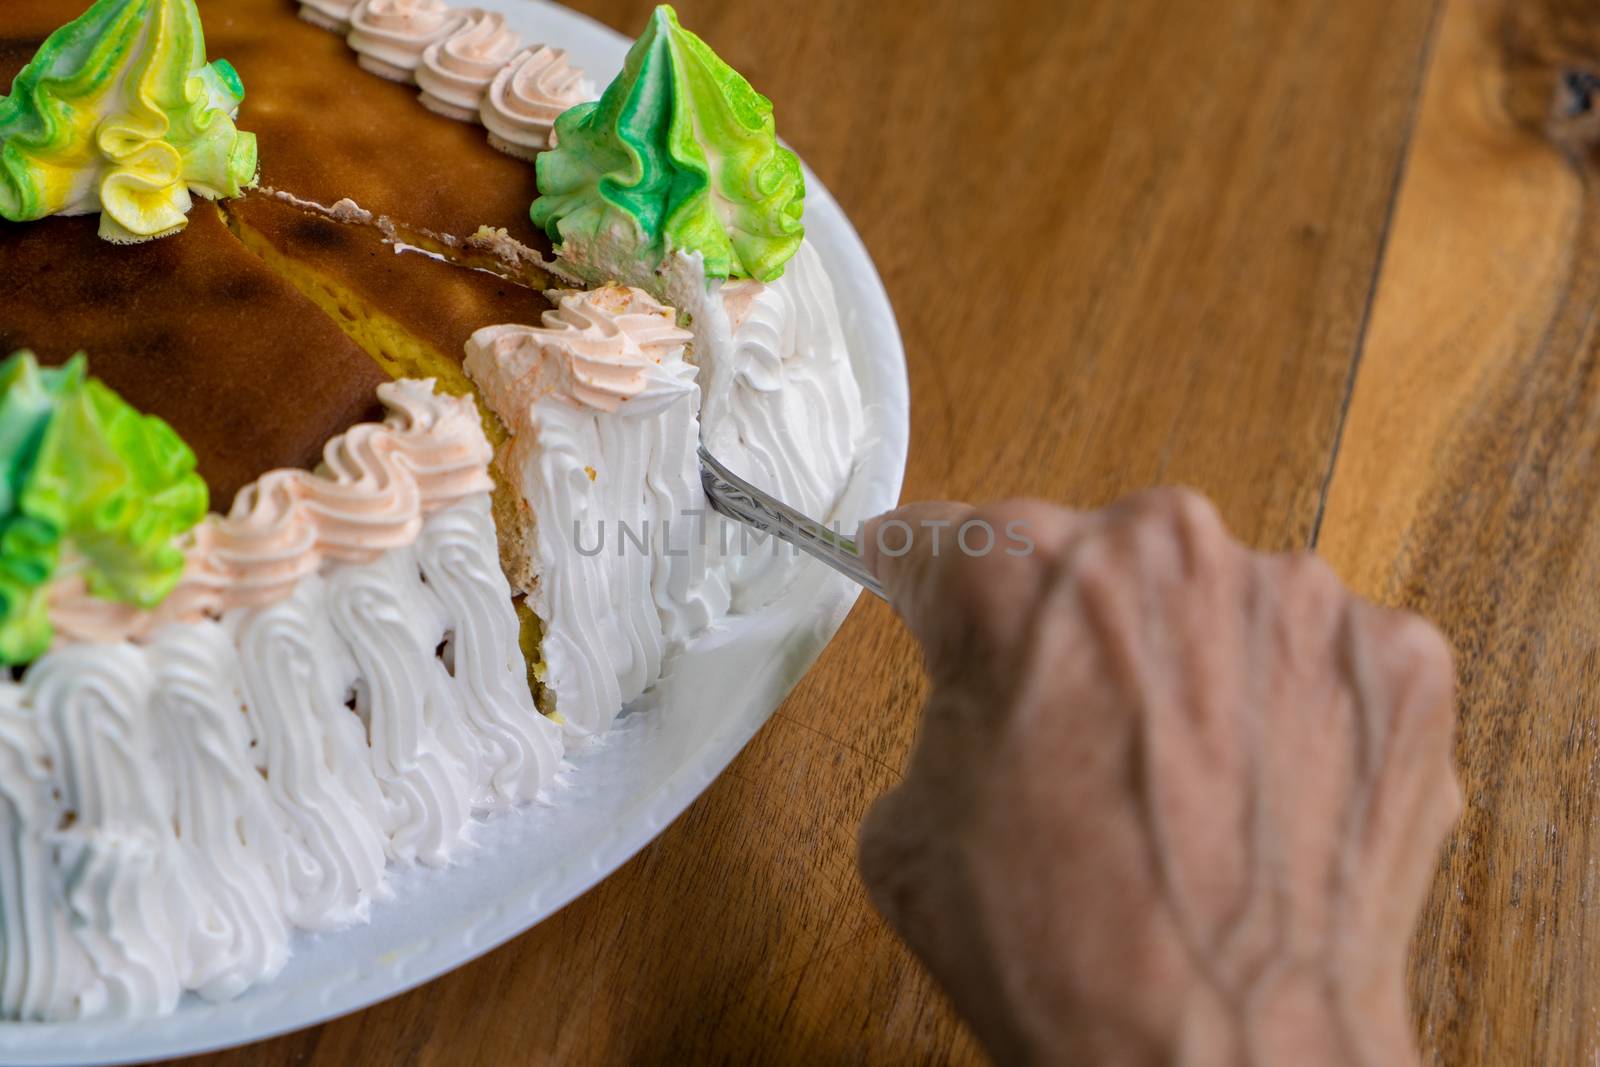 A closeup of a cake and an wrinkled old hand cutting the cake